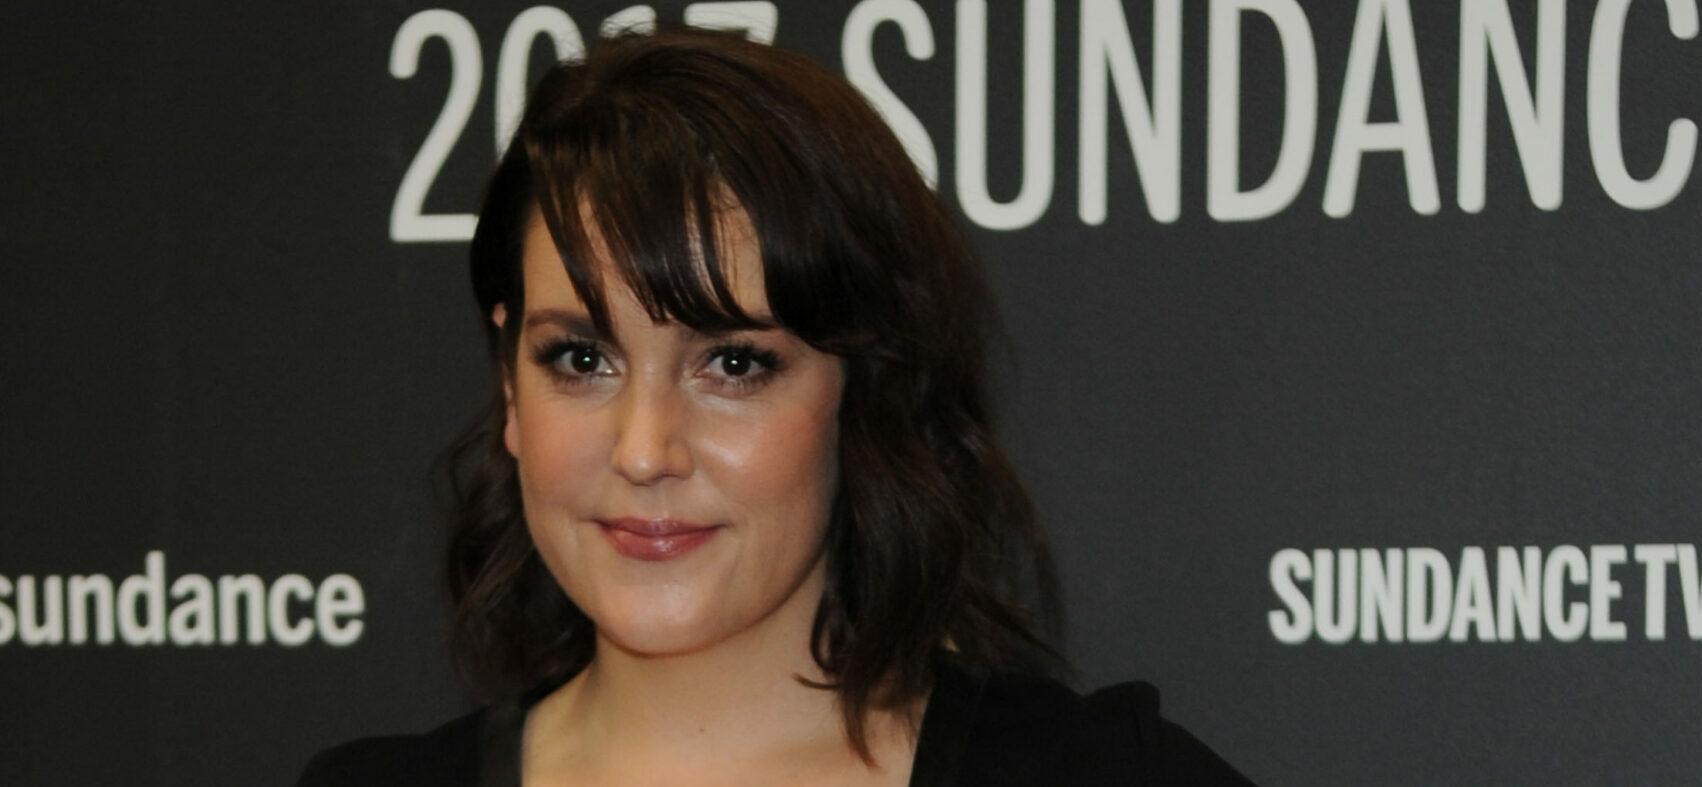 Melanie Lynskey arrives on the red carpet at Sundance 2017 for her film 'I don't feel at home in this world anymore'